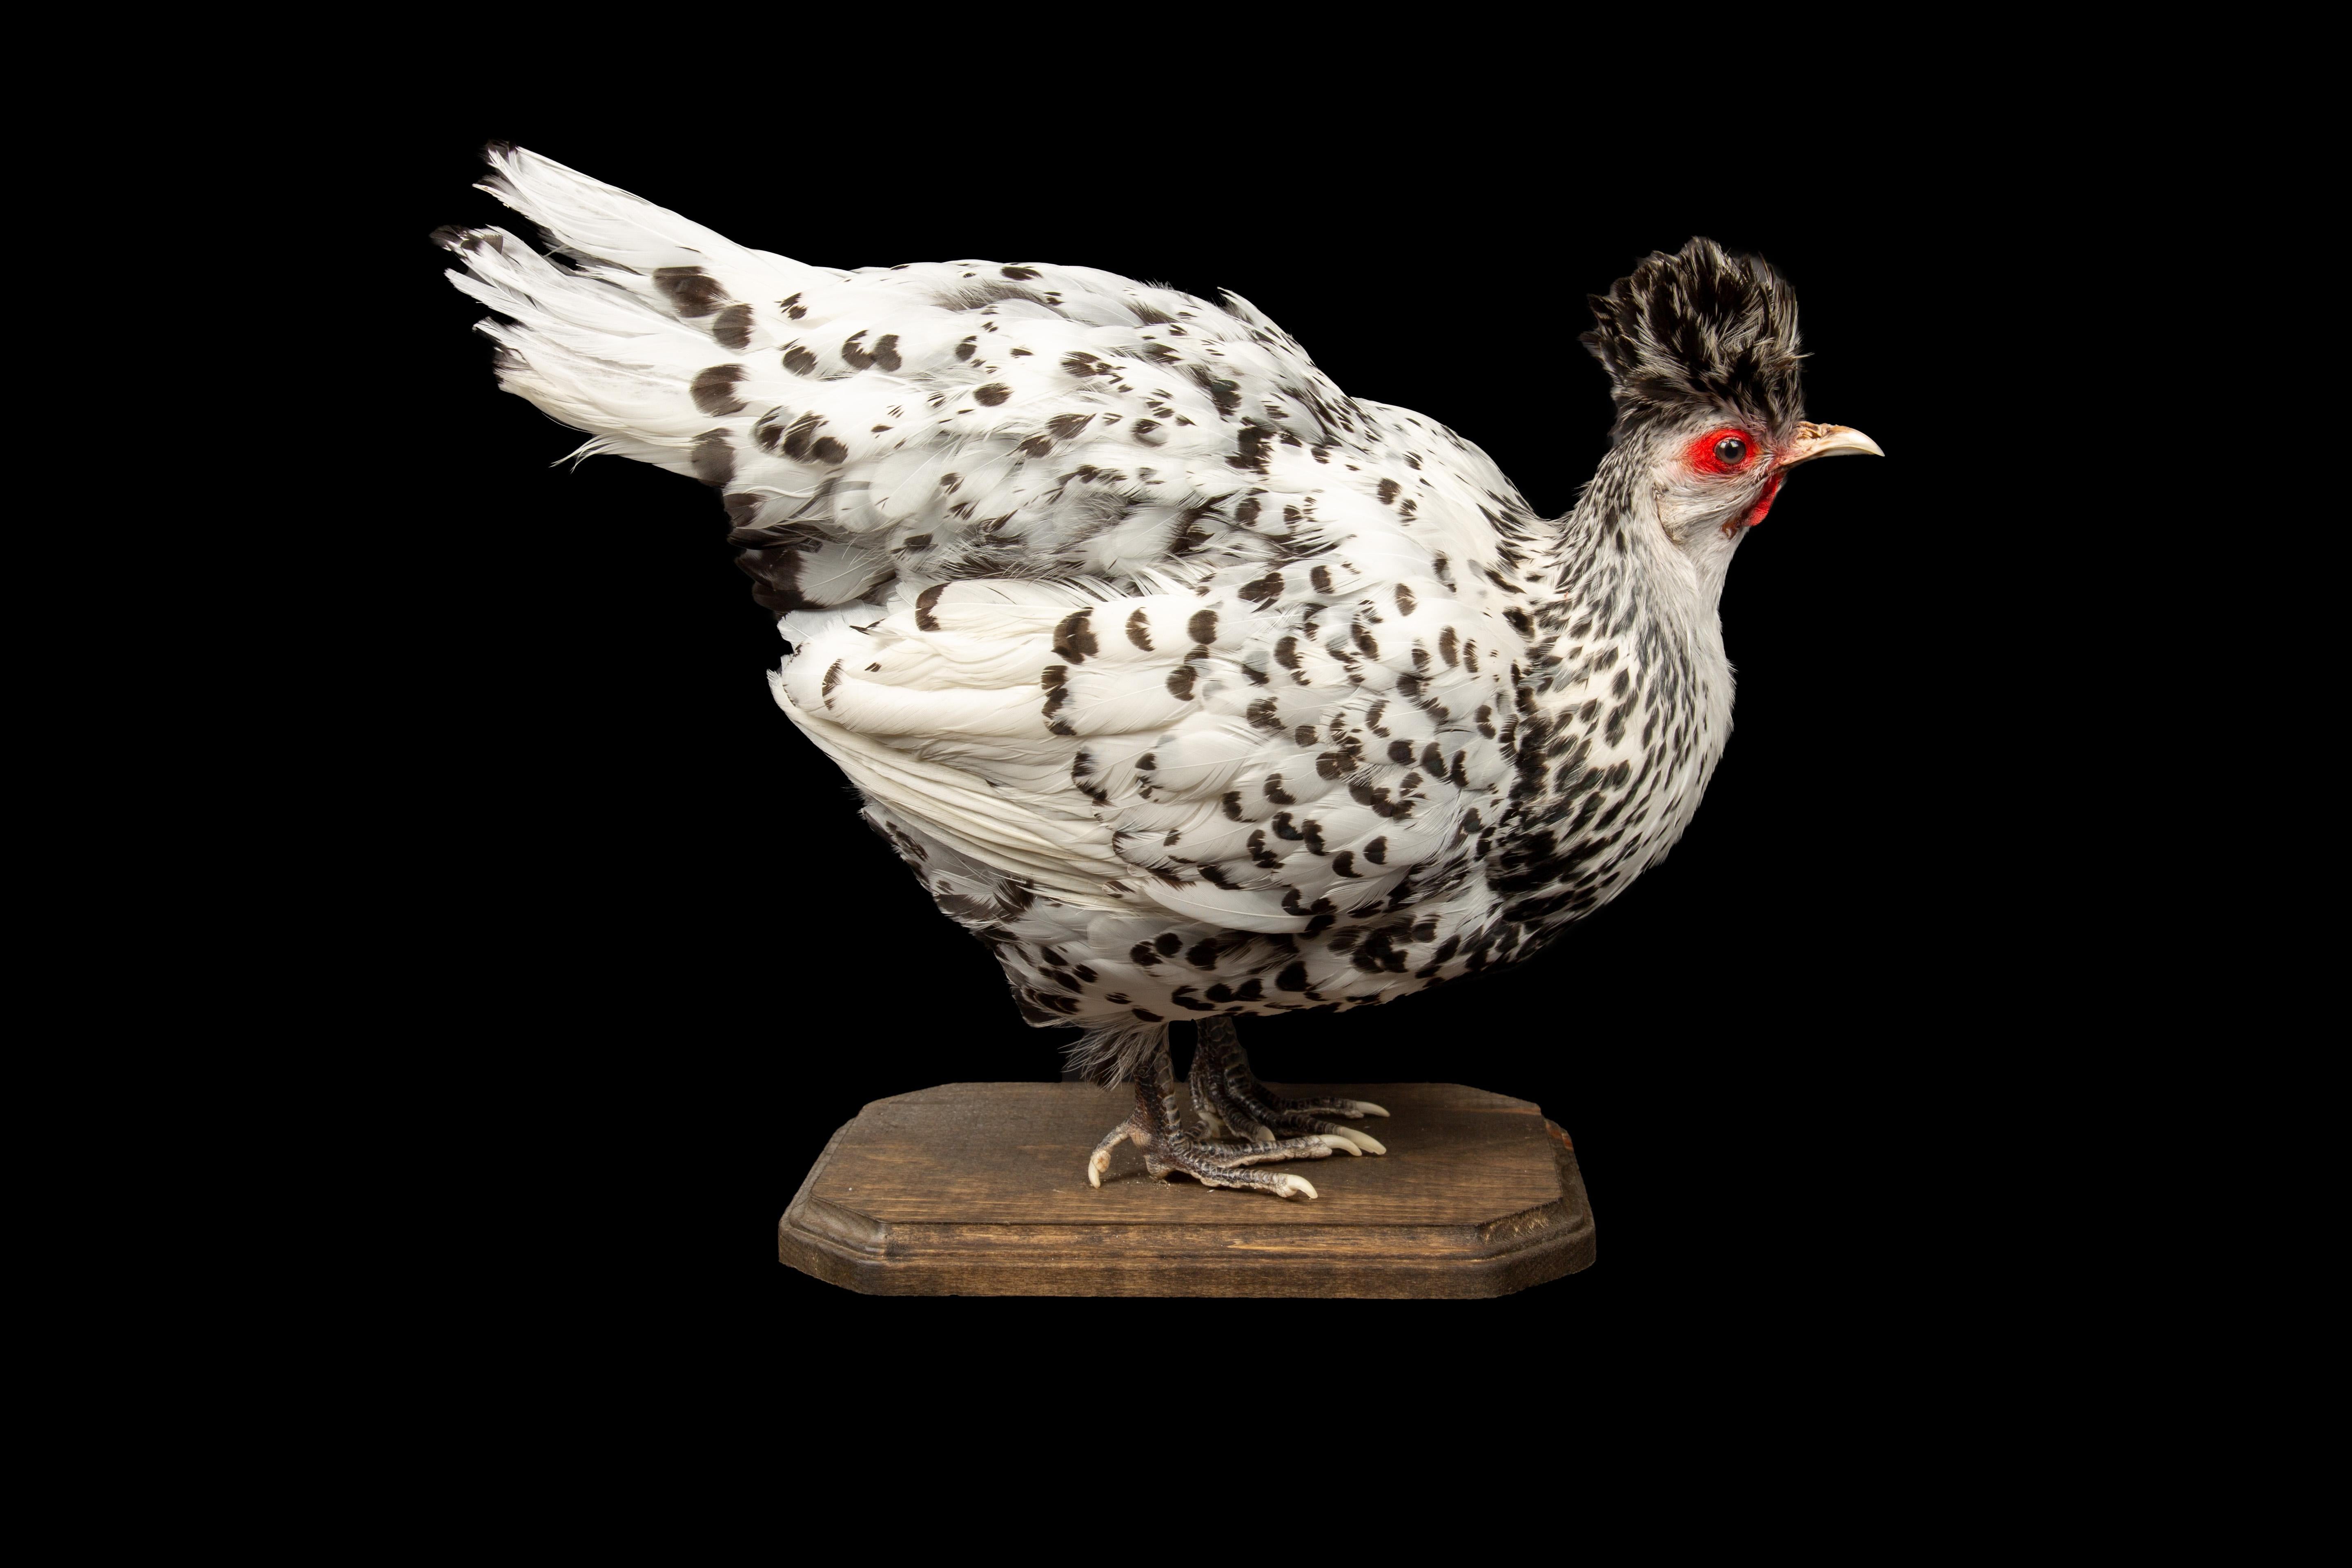 The Appenzeller Spitzhauben chicken, a unique breed hailing from the picturesque Appenzell region of Switzerland, owes its name to its striking resemblance to the traditional pointed hats adorning the women of that area. With its elegant and